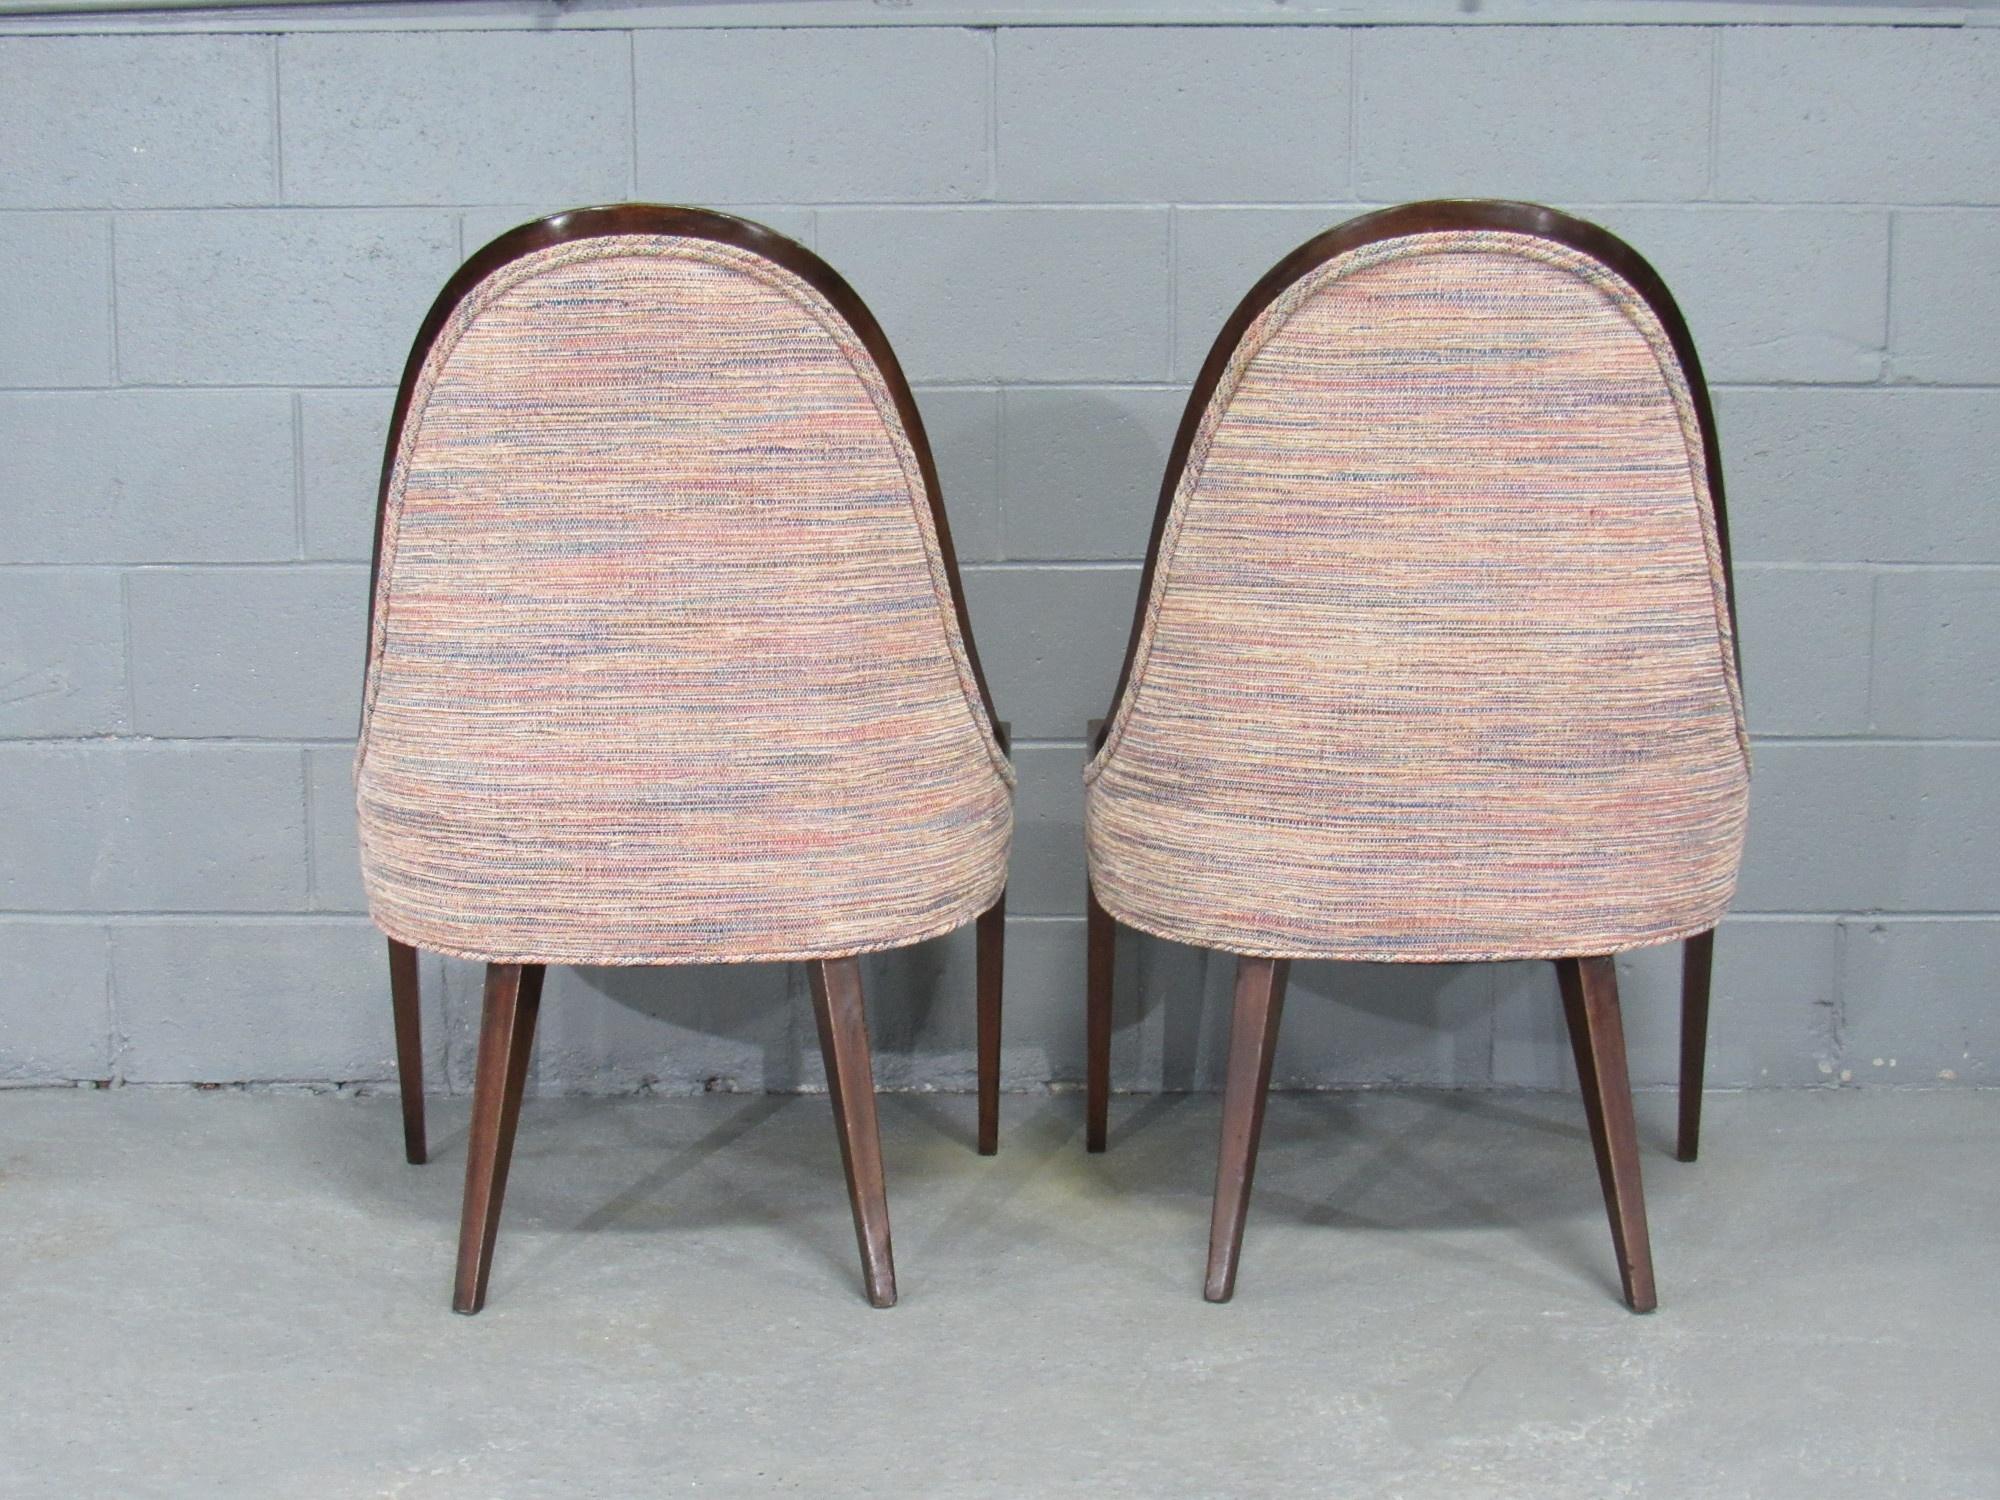 Pair of Mid-Century Modern 1950s gondola slipper chairs with a graceful mahogany frame and splayed rear legs designed by Harvey Probber, American. Chairs have sturdy mahogany frames and upholstered in high-quality fabric.